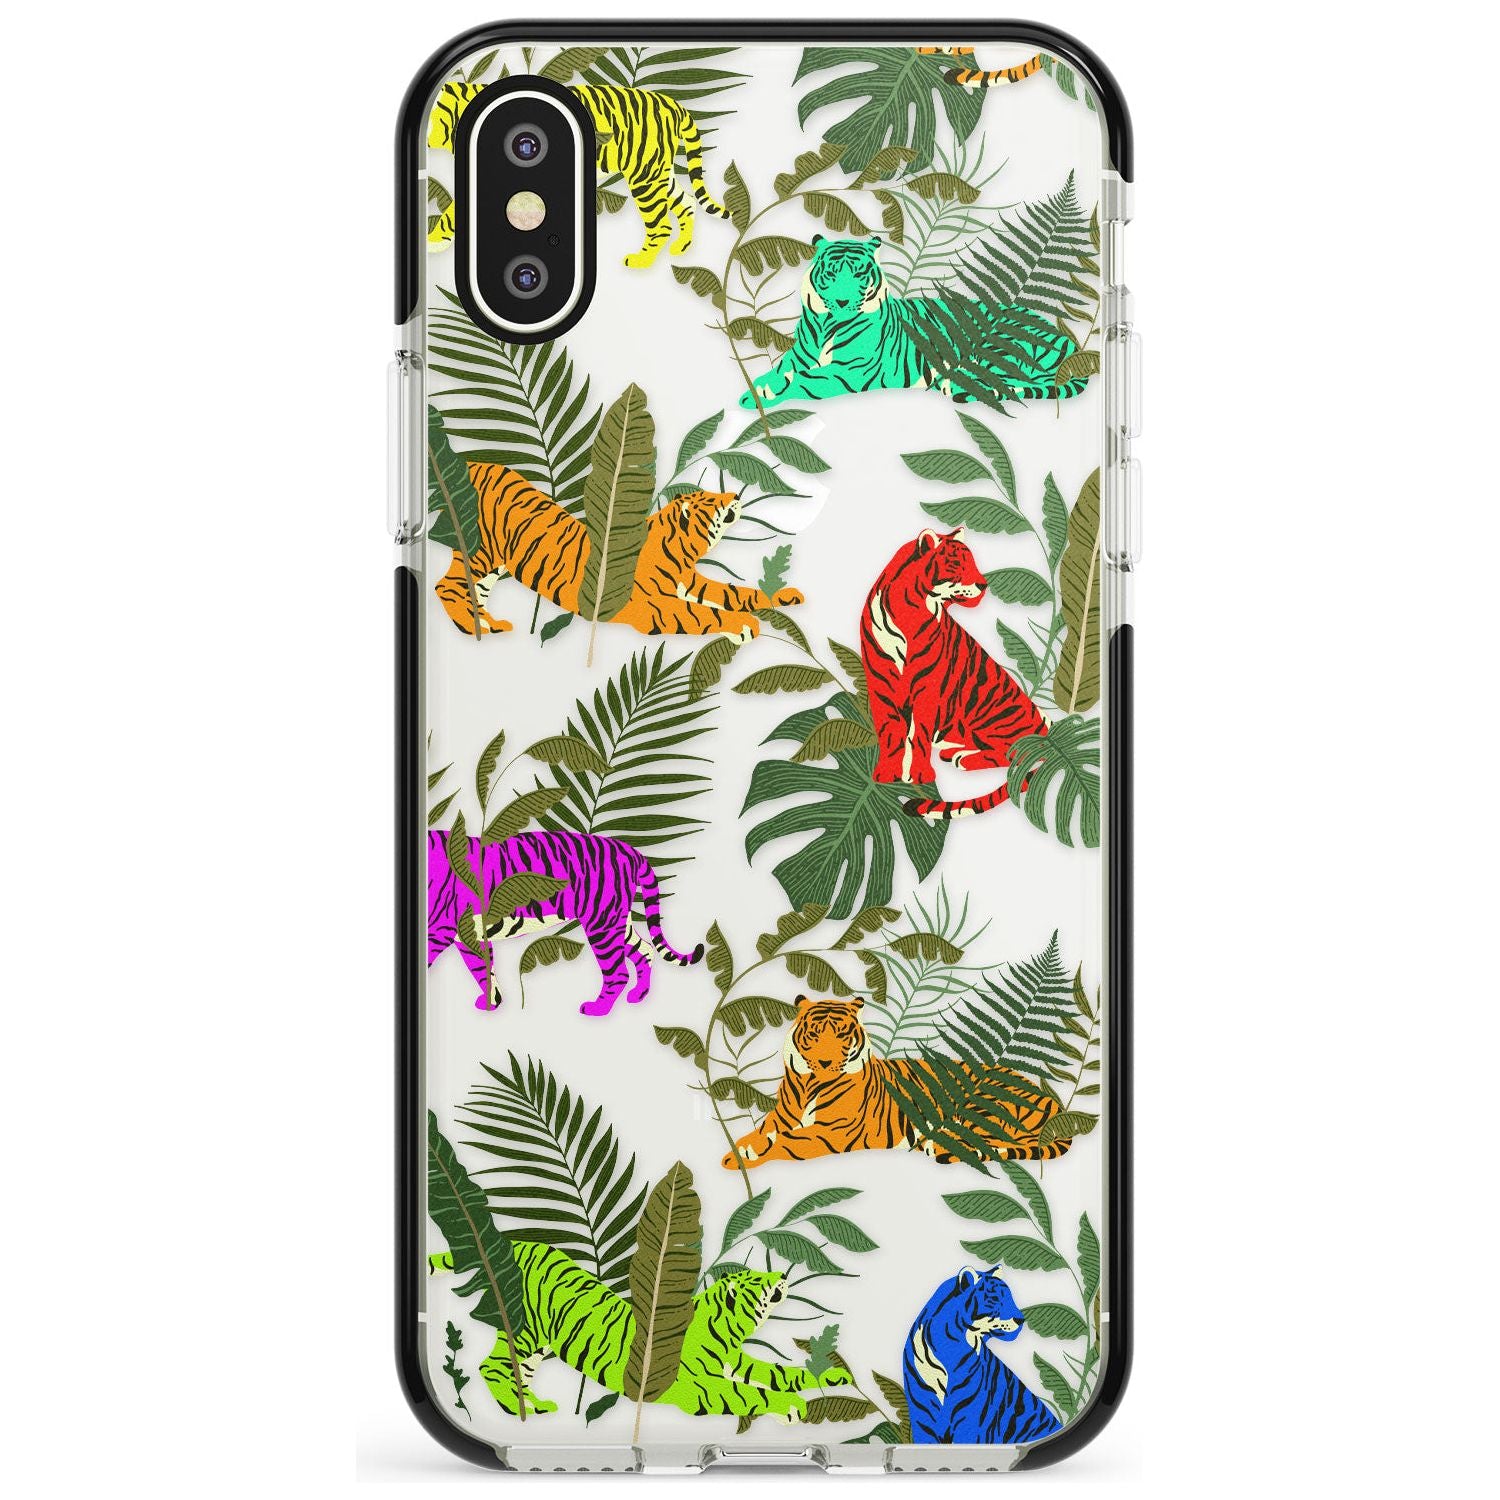 Colourful Tiger Jungle Cat Pattern Black Impact Phone Case for iPhone X XS Max XR